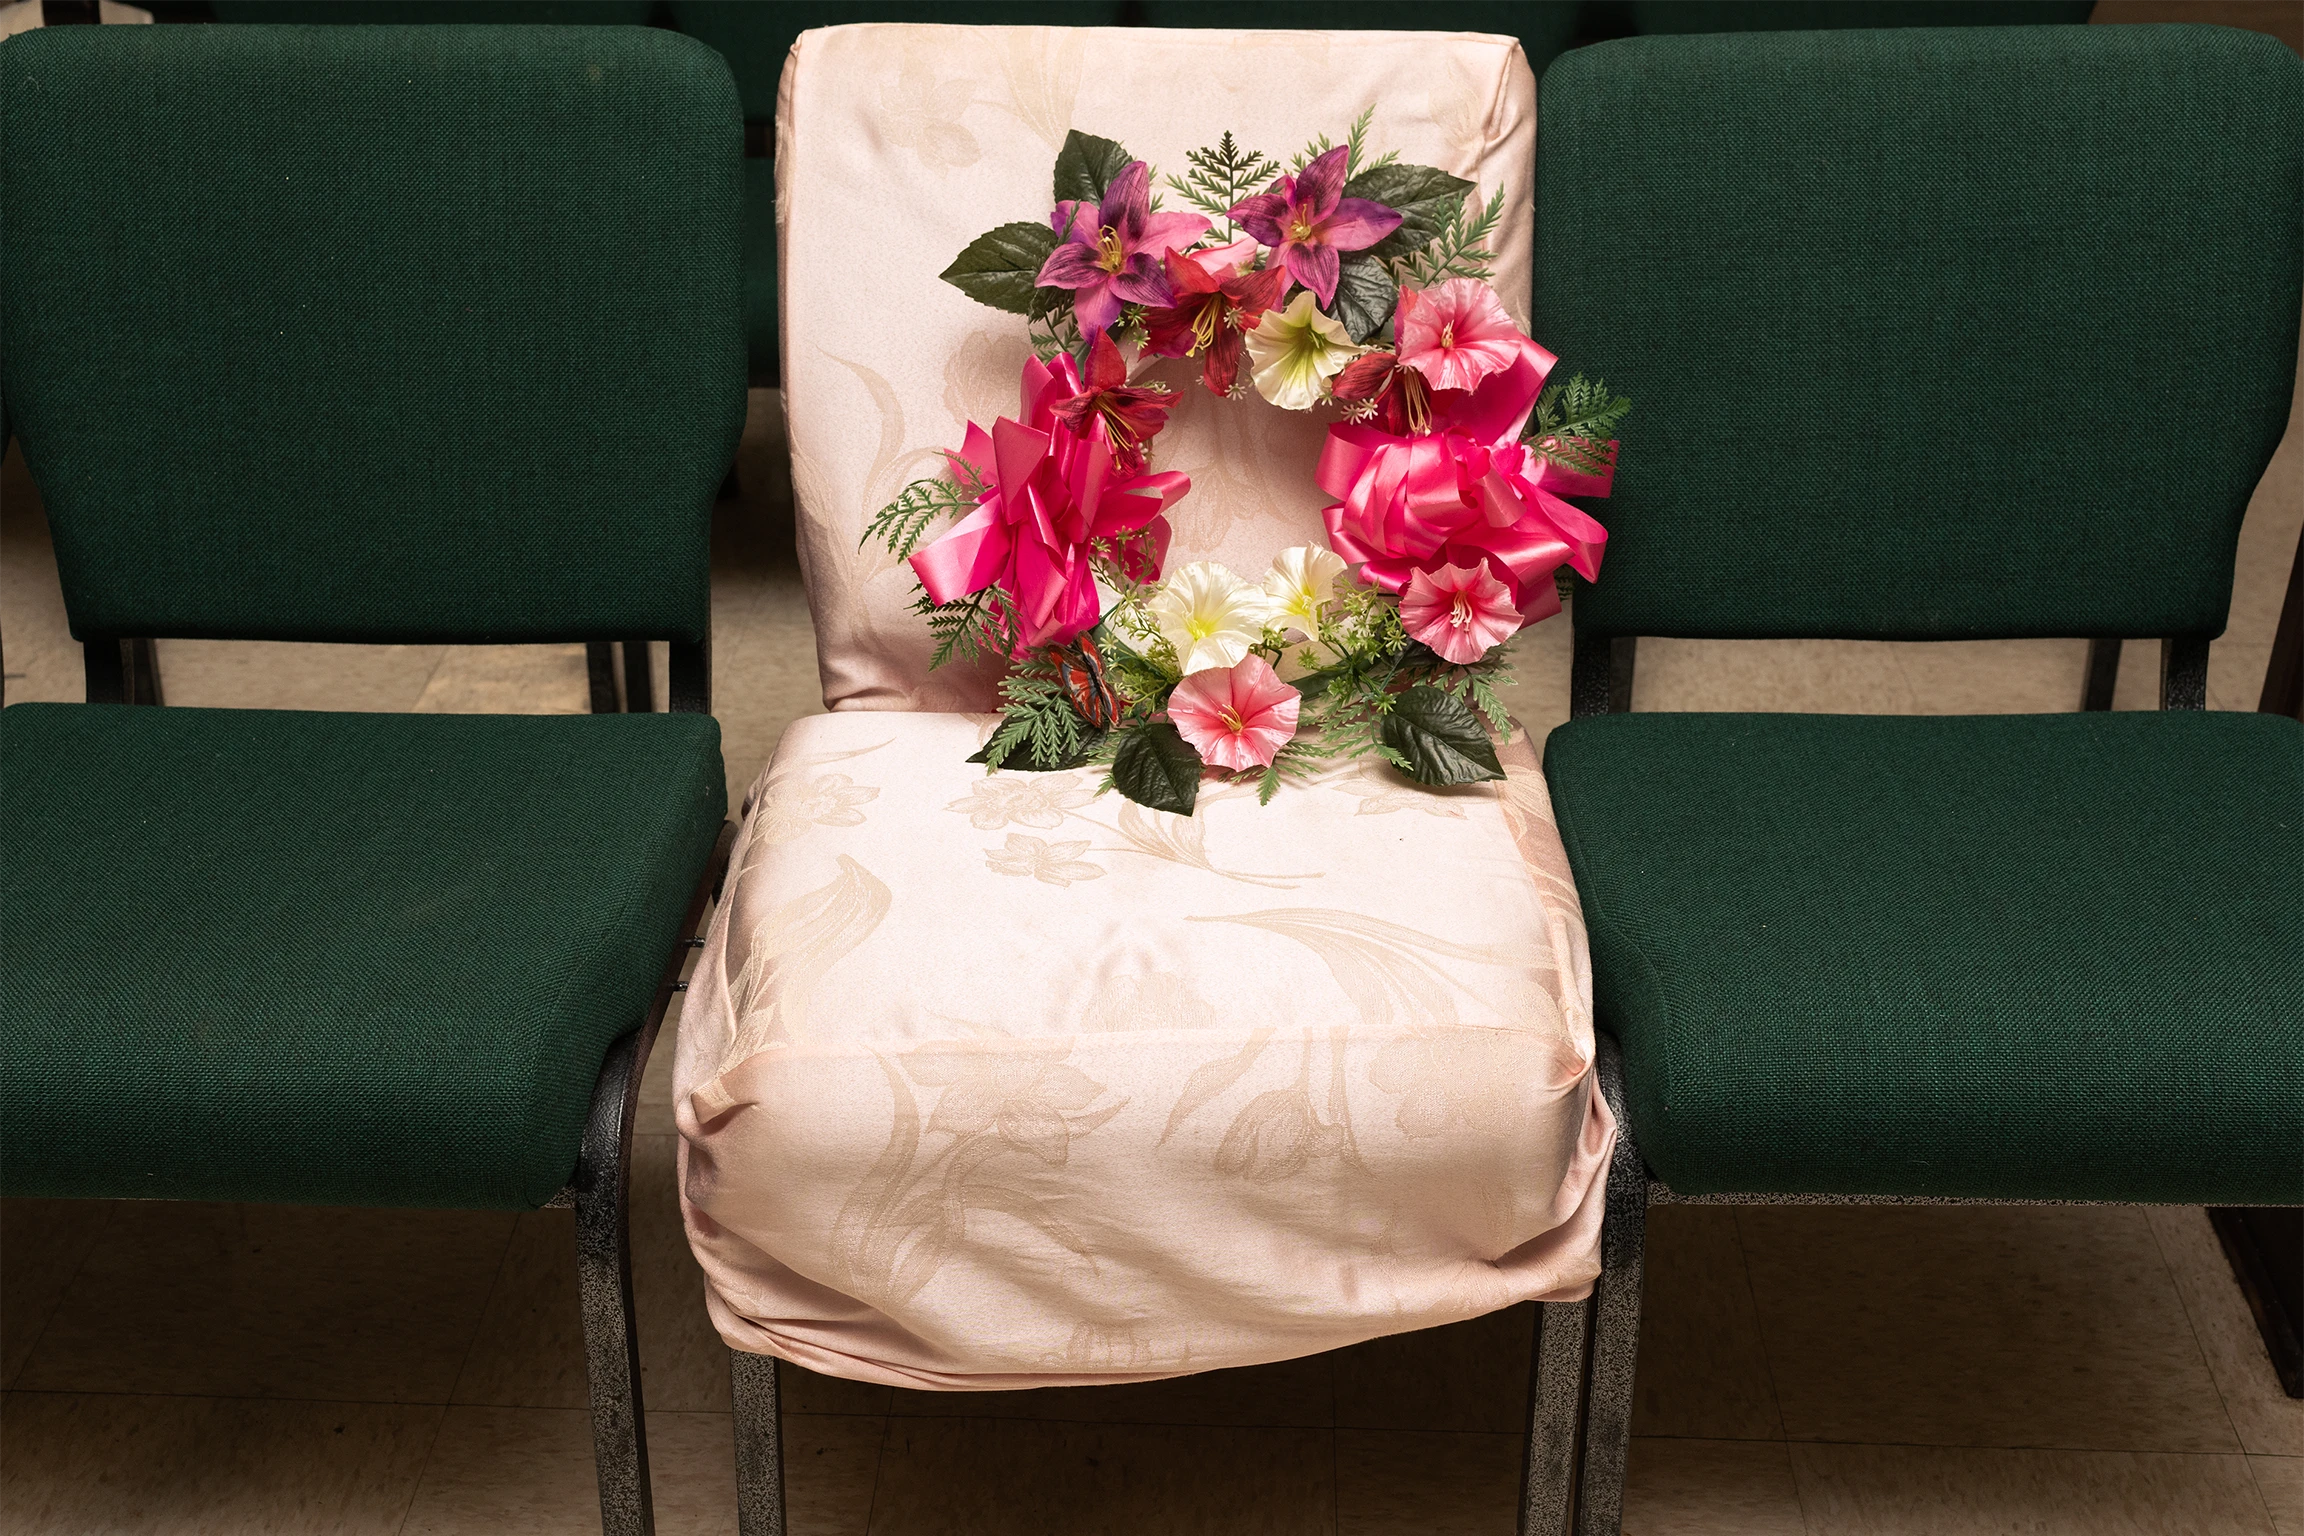 Three chairs set next to each other. The two on the ends have dark green fabric cushions. The middle is draped in a white cloth with a decorative floral wreath sitting propped up on it.